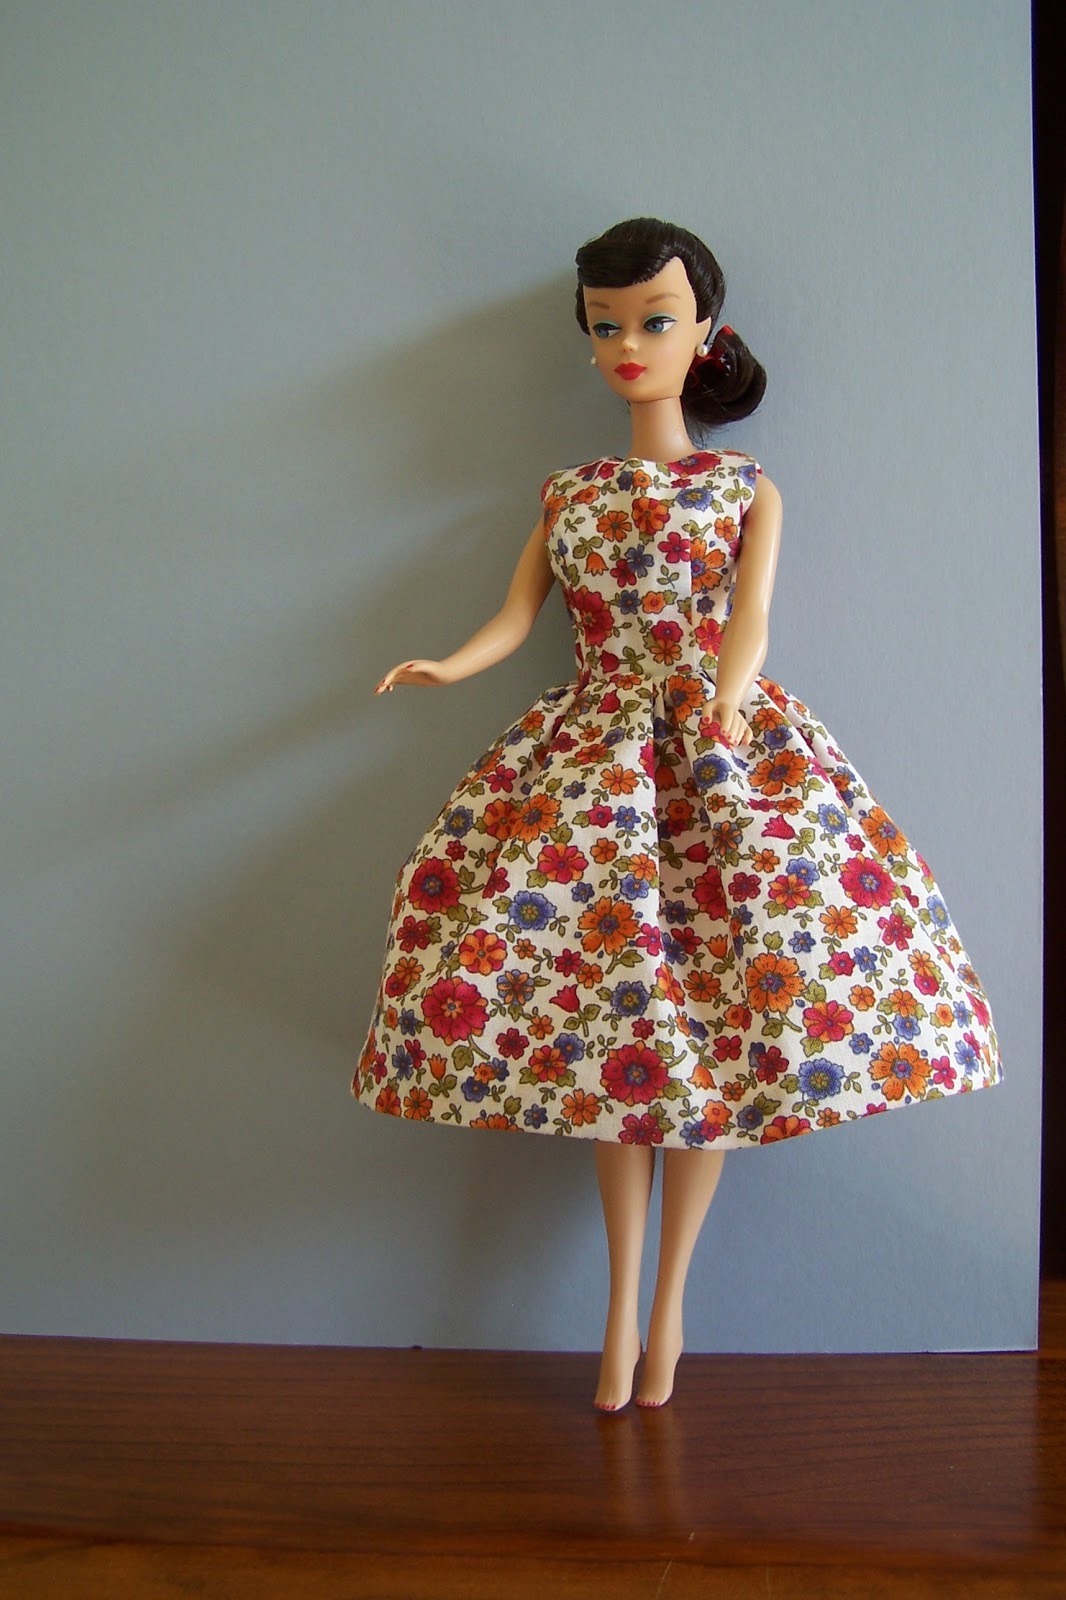 Lizzie's Arty Crafty 'n Dolls: Dolls! Finished Dress & Capelet for my